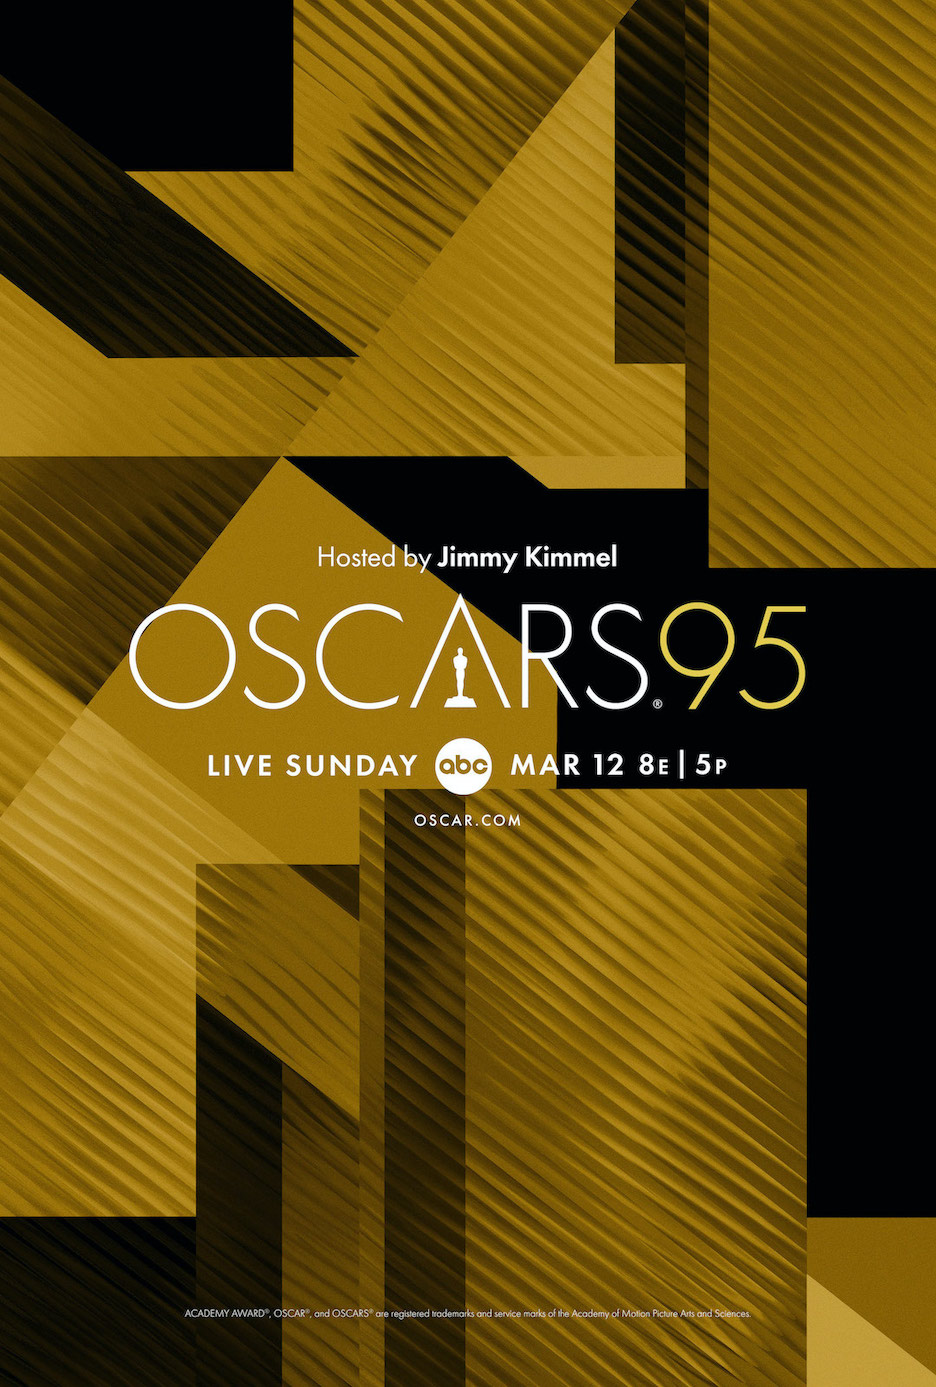 Oscars key art (Image courtesy of the Academy of Motion Picture Arts and Sciences communications department)